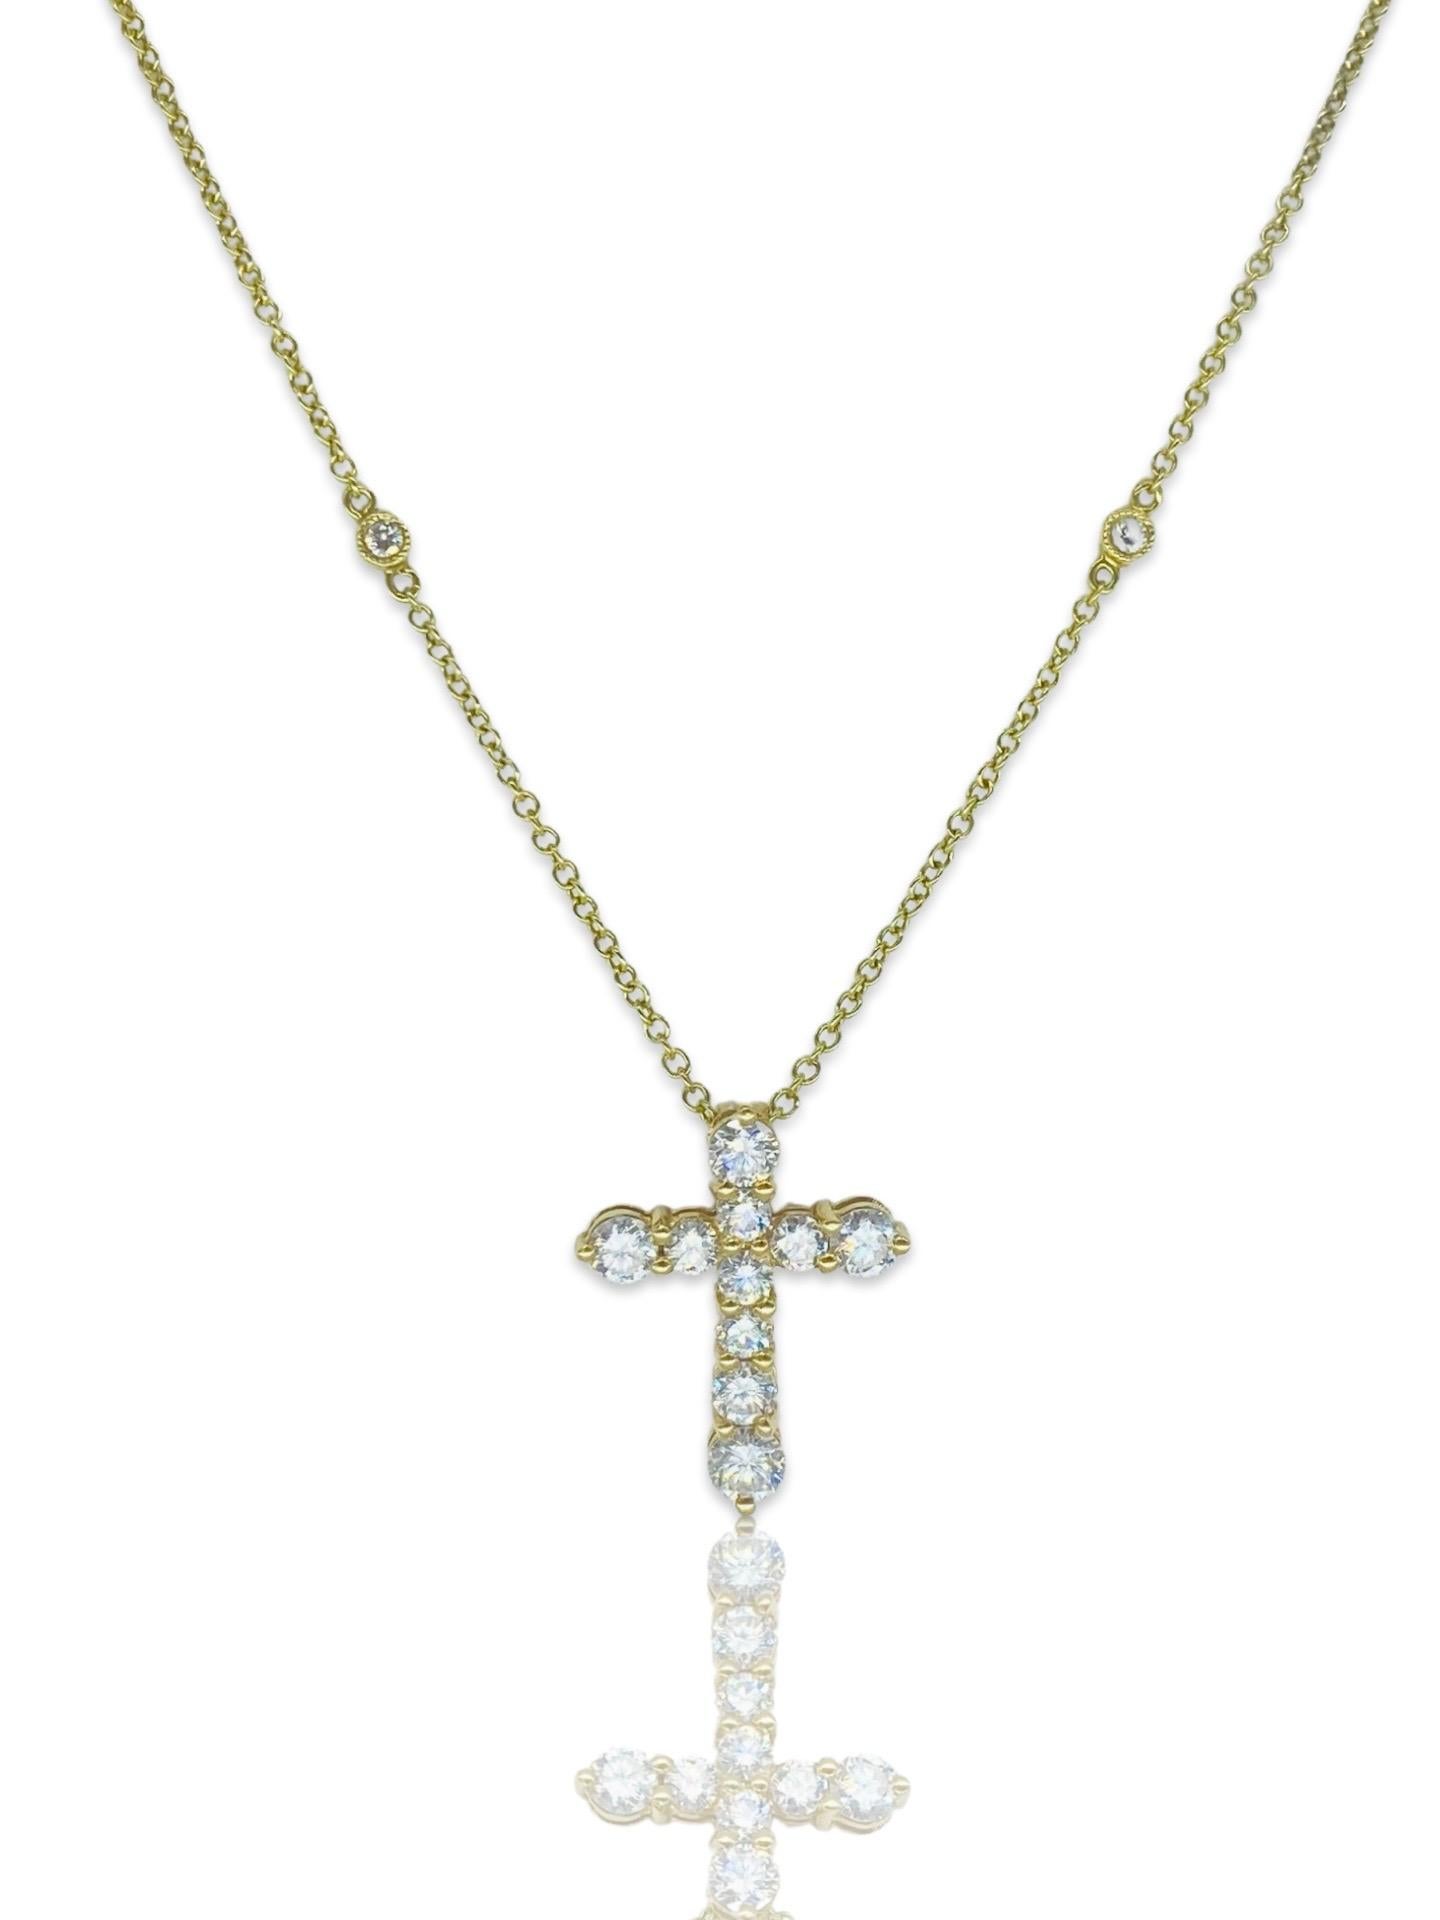 Designer 1.00 Carat Diamonds By The Yard Cross Pendant Necklace 18k Gold. The pendant features F-G/VS+ natural earth mined diamonds with a total carat weight of 0.86 (stamped on back of pendant) the necklace features 0.14tcw diamonds natural and